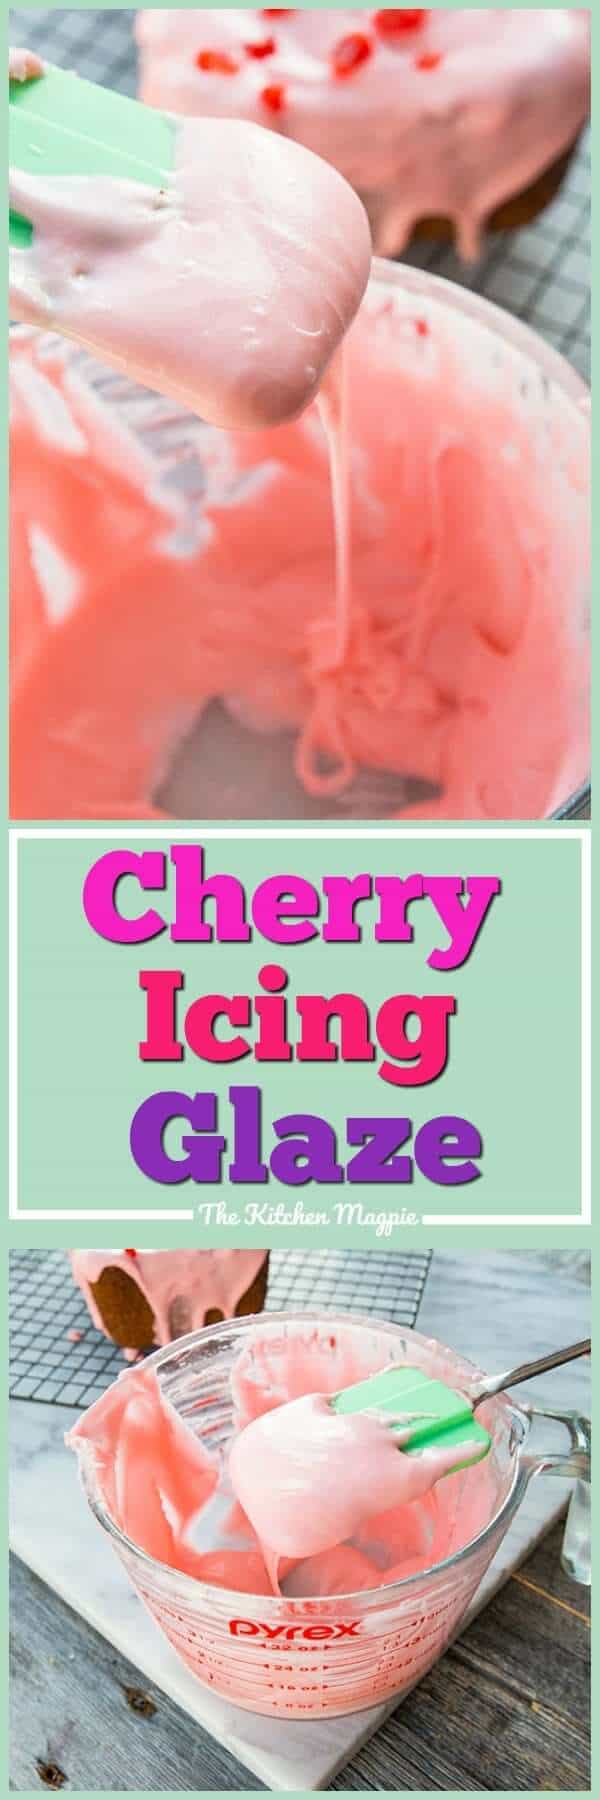 This decadent but easy cherry icing glaze is perfect for muffins, cakes, loaf cakes and more! #icing #cherry #cake #recipe #dessert